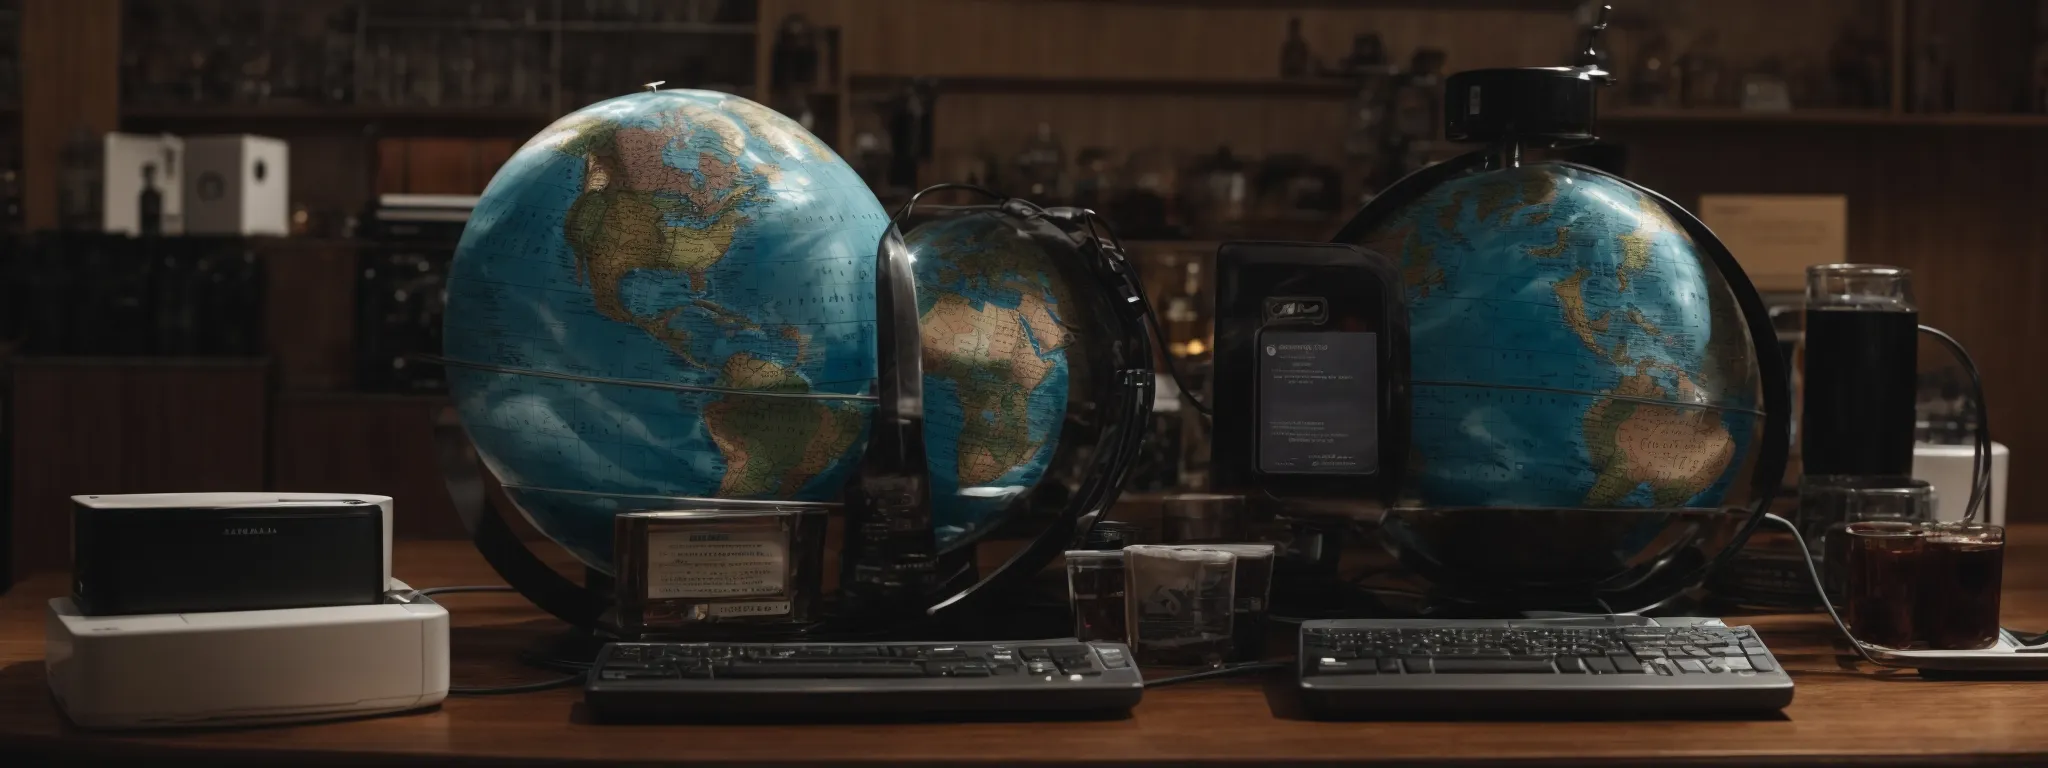 a globe surrounded by various digital devices displaying search bars with different language settings.